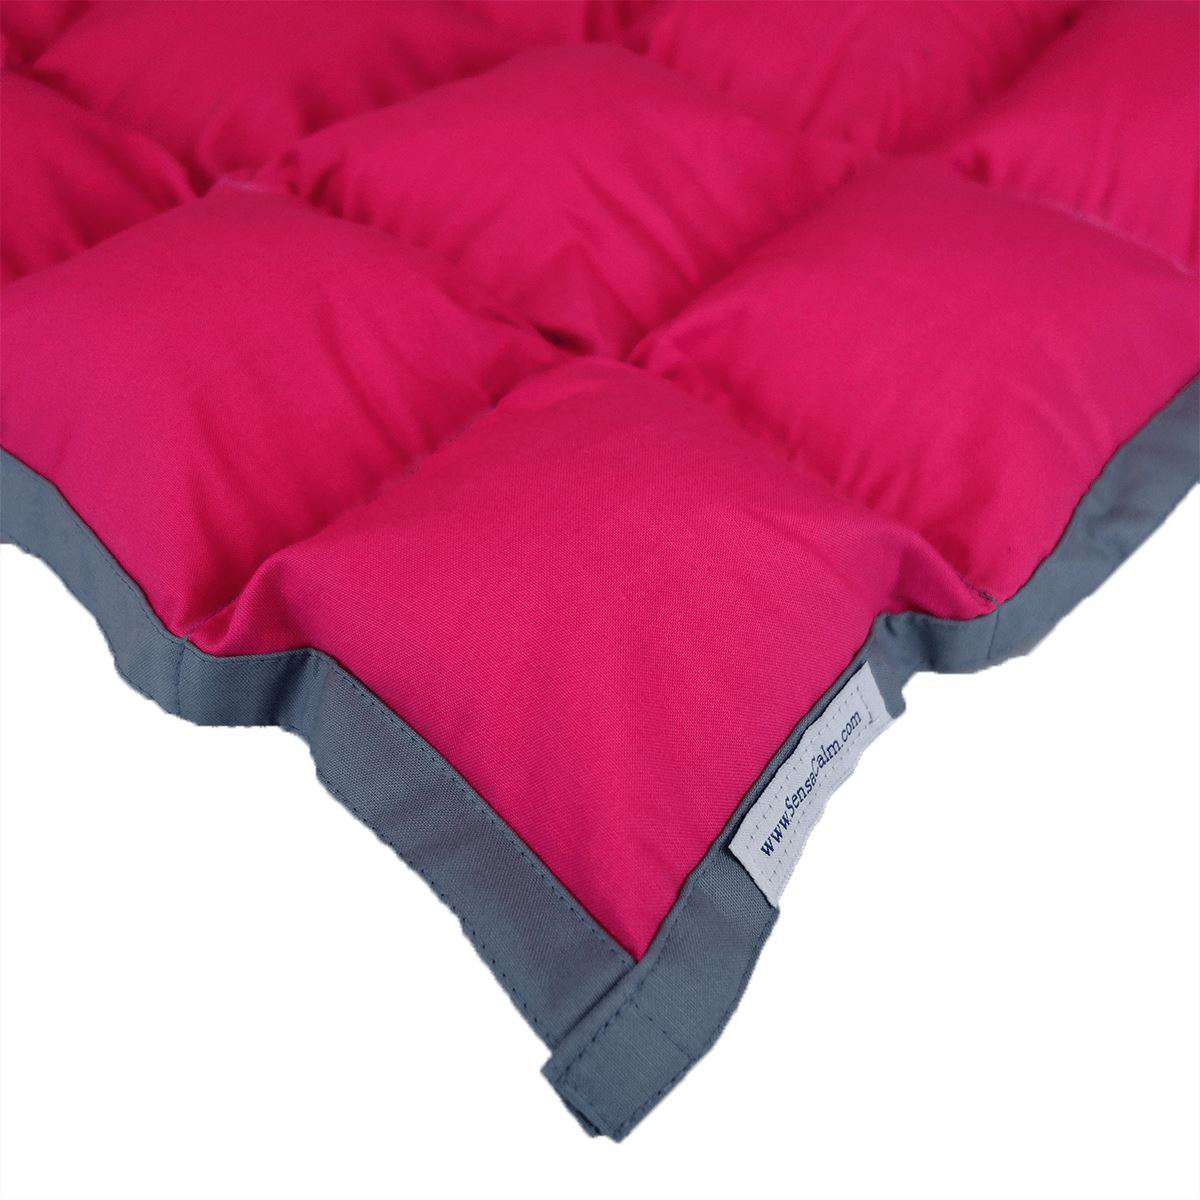 Clearance Weighted Blanket - Small 7 lb Raspberry and Volcanic Gray (for 60 lb user) MULTIPLES AVAILABLE